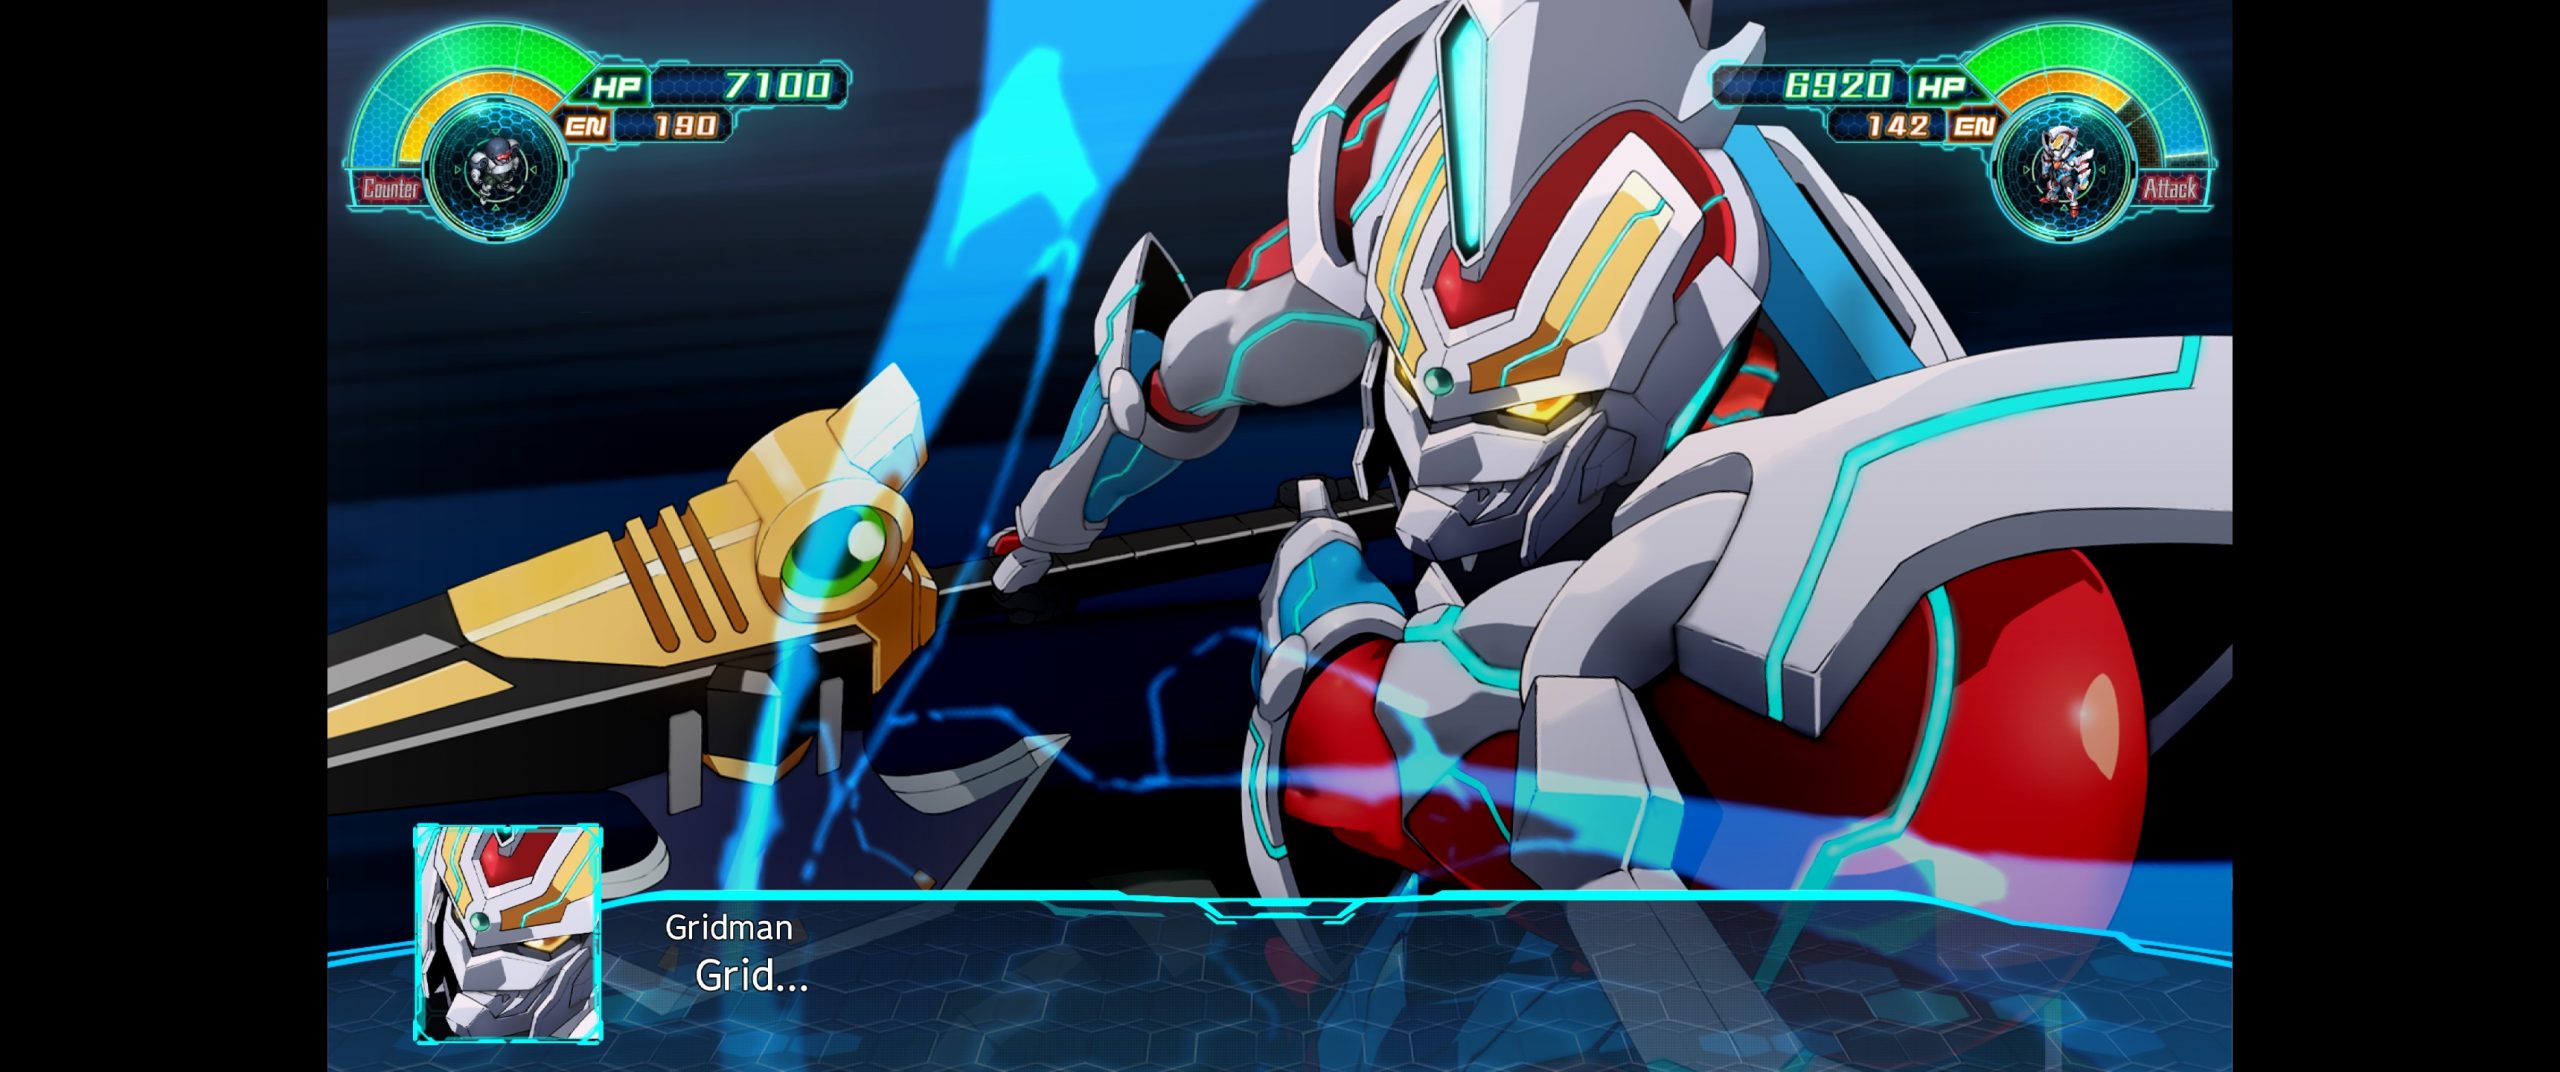 Why Super Robot Wars 30 is a big deal for strategy RPG fans worldwide